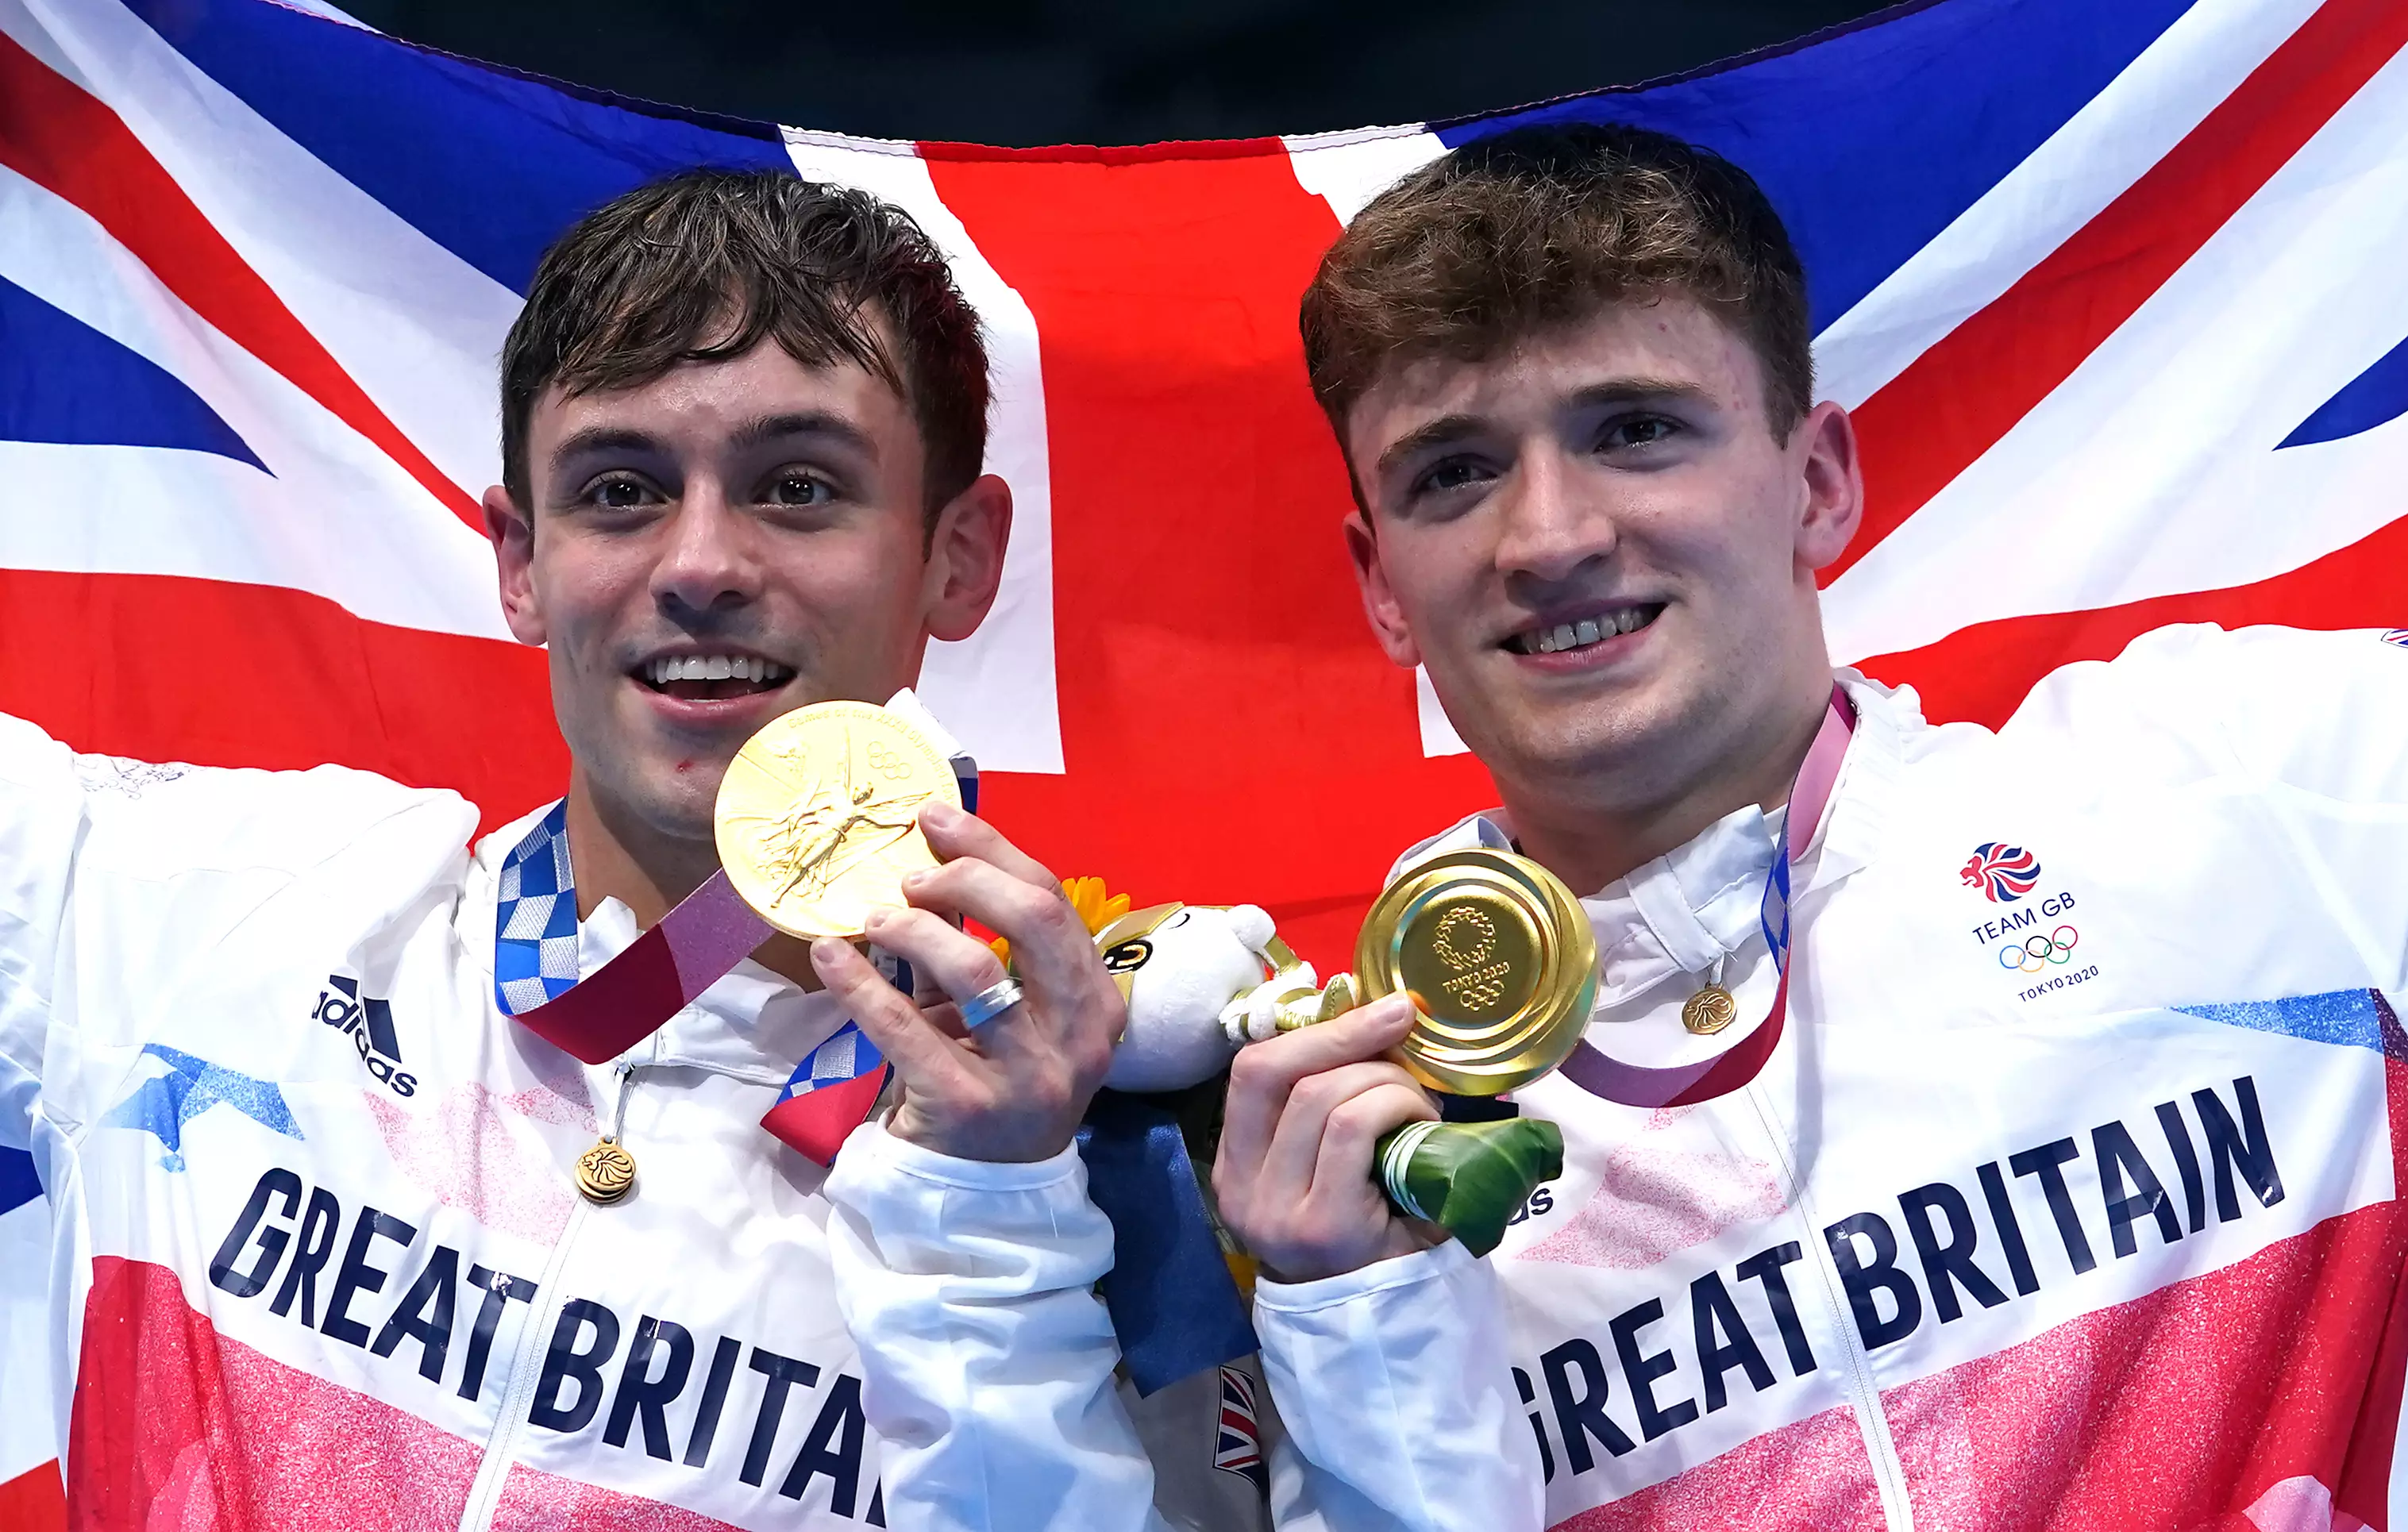 Tom Daley and Matty Lee win gold medals at Tokyo 2020 (